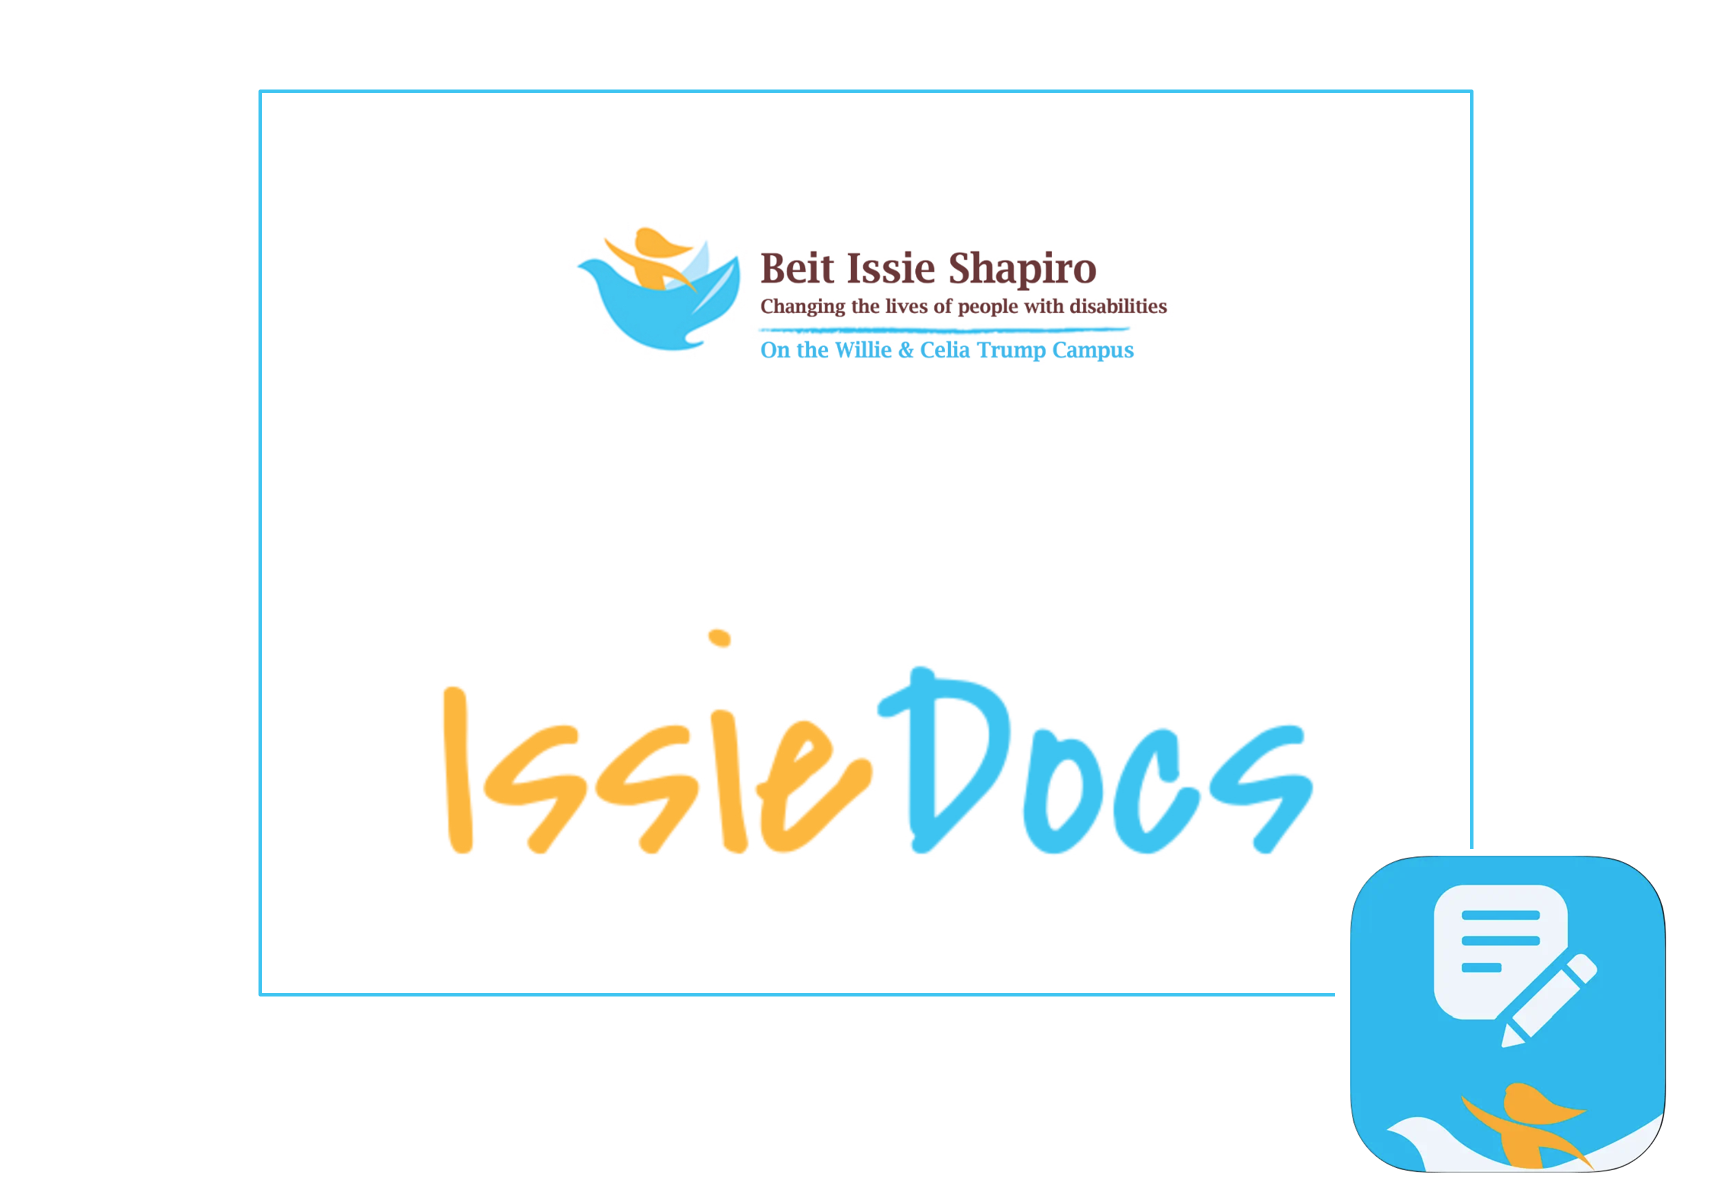 IssieDocs splashscreen with Beit Issie Shapiro logo and app icon in bottom right corner. colors yellow/orange and turquoise